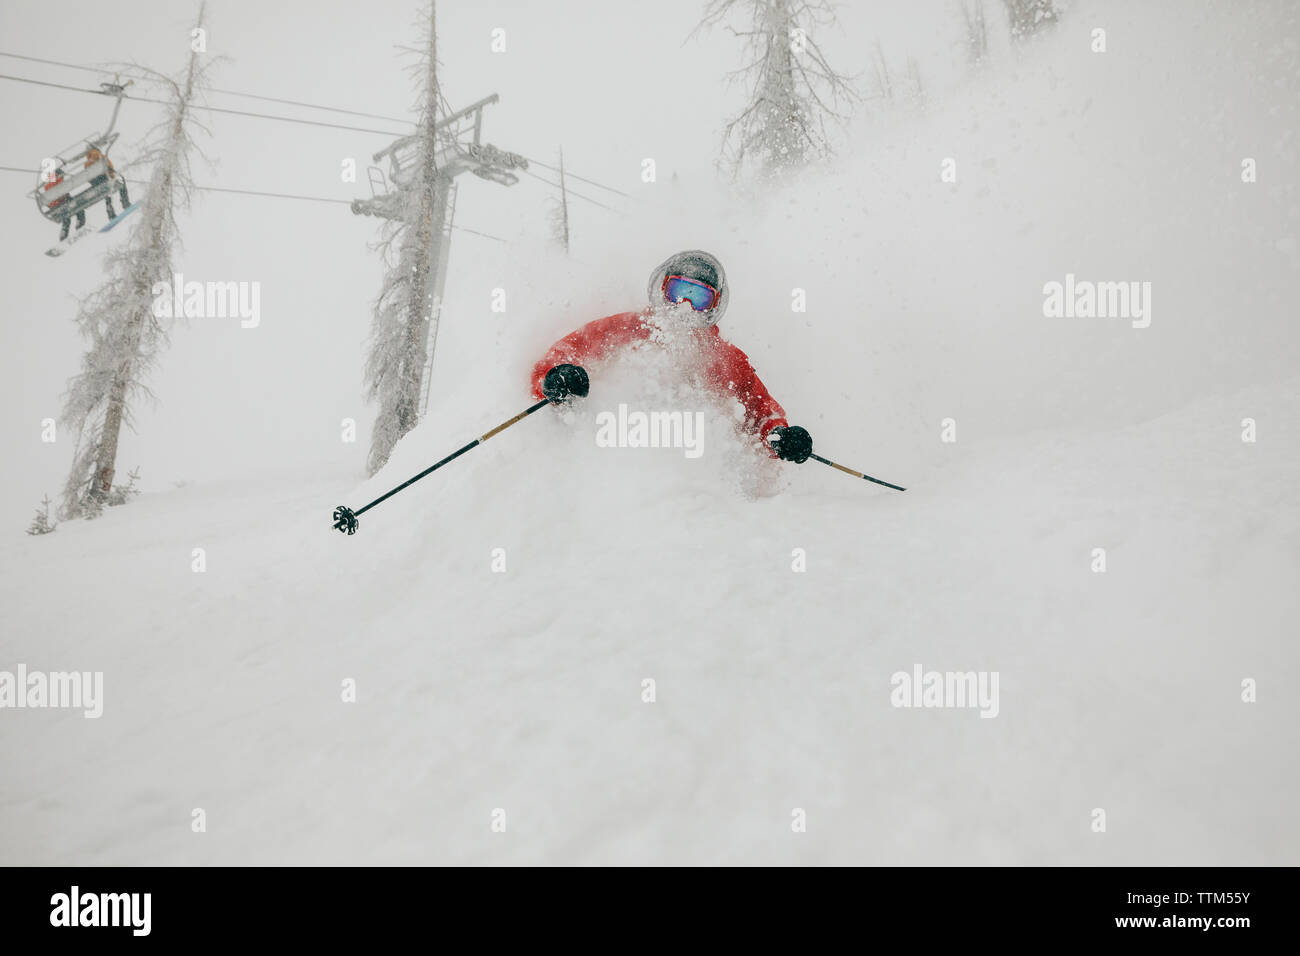 Man skiing on snow covered mountain in forest Stock Photo